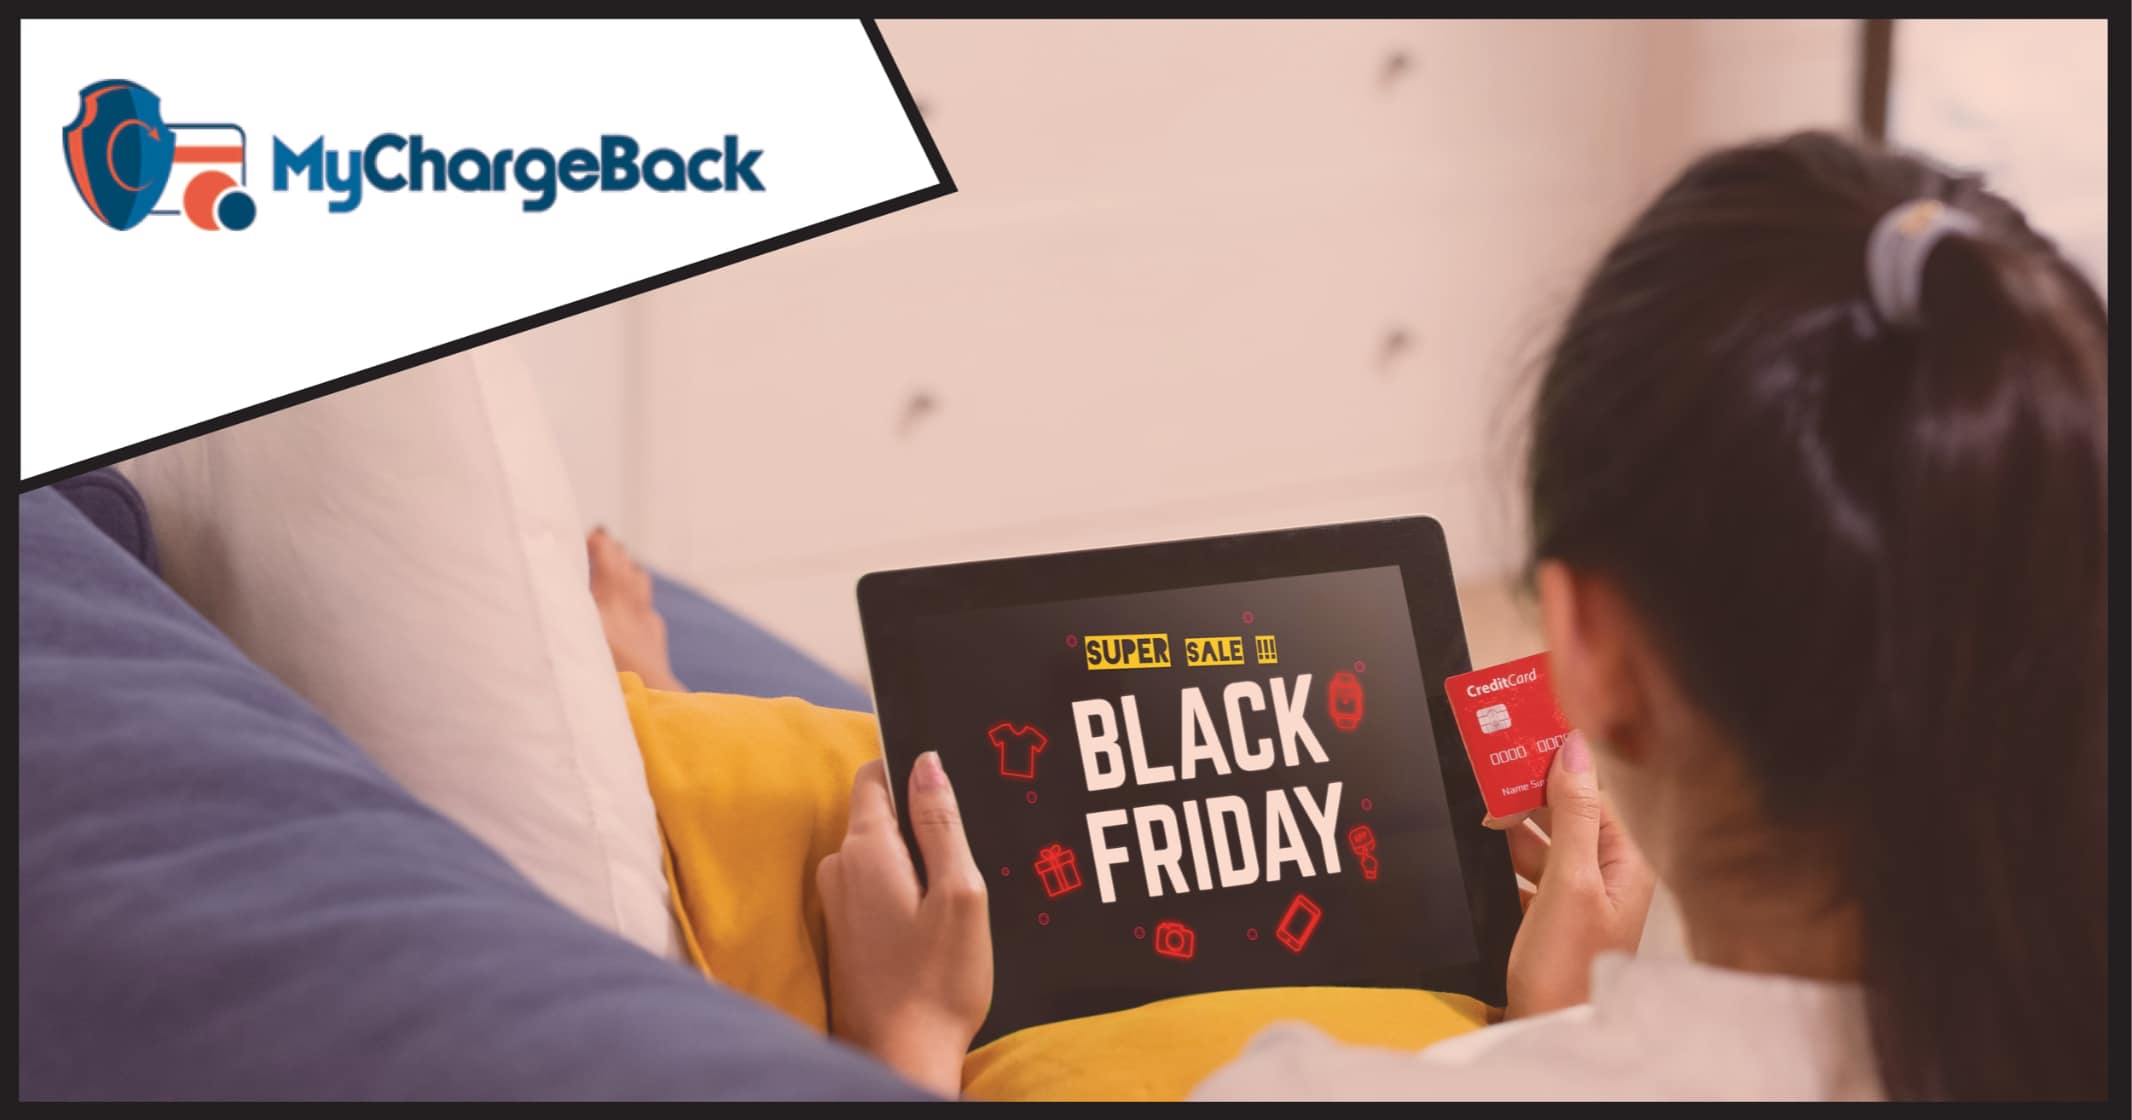 A woman looks at a black friday deal on her iPad, illustrating the risk of buy now pay later scams